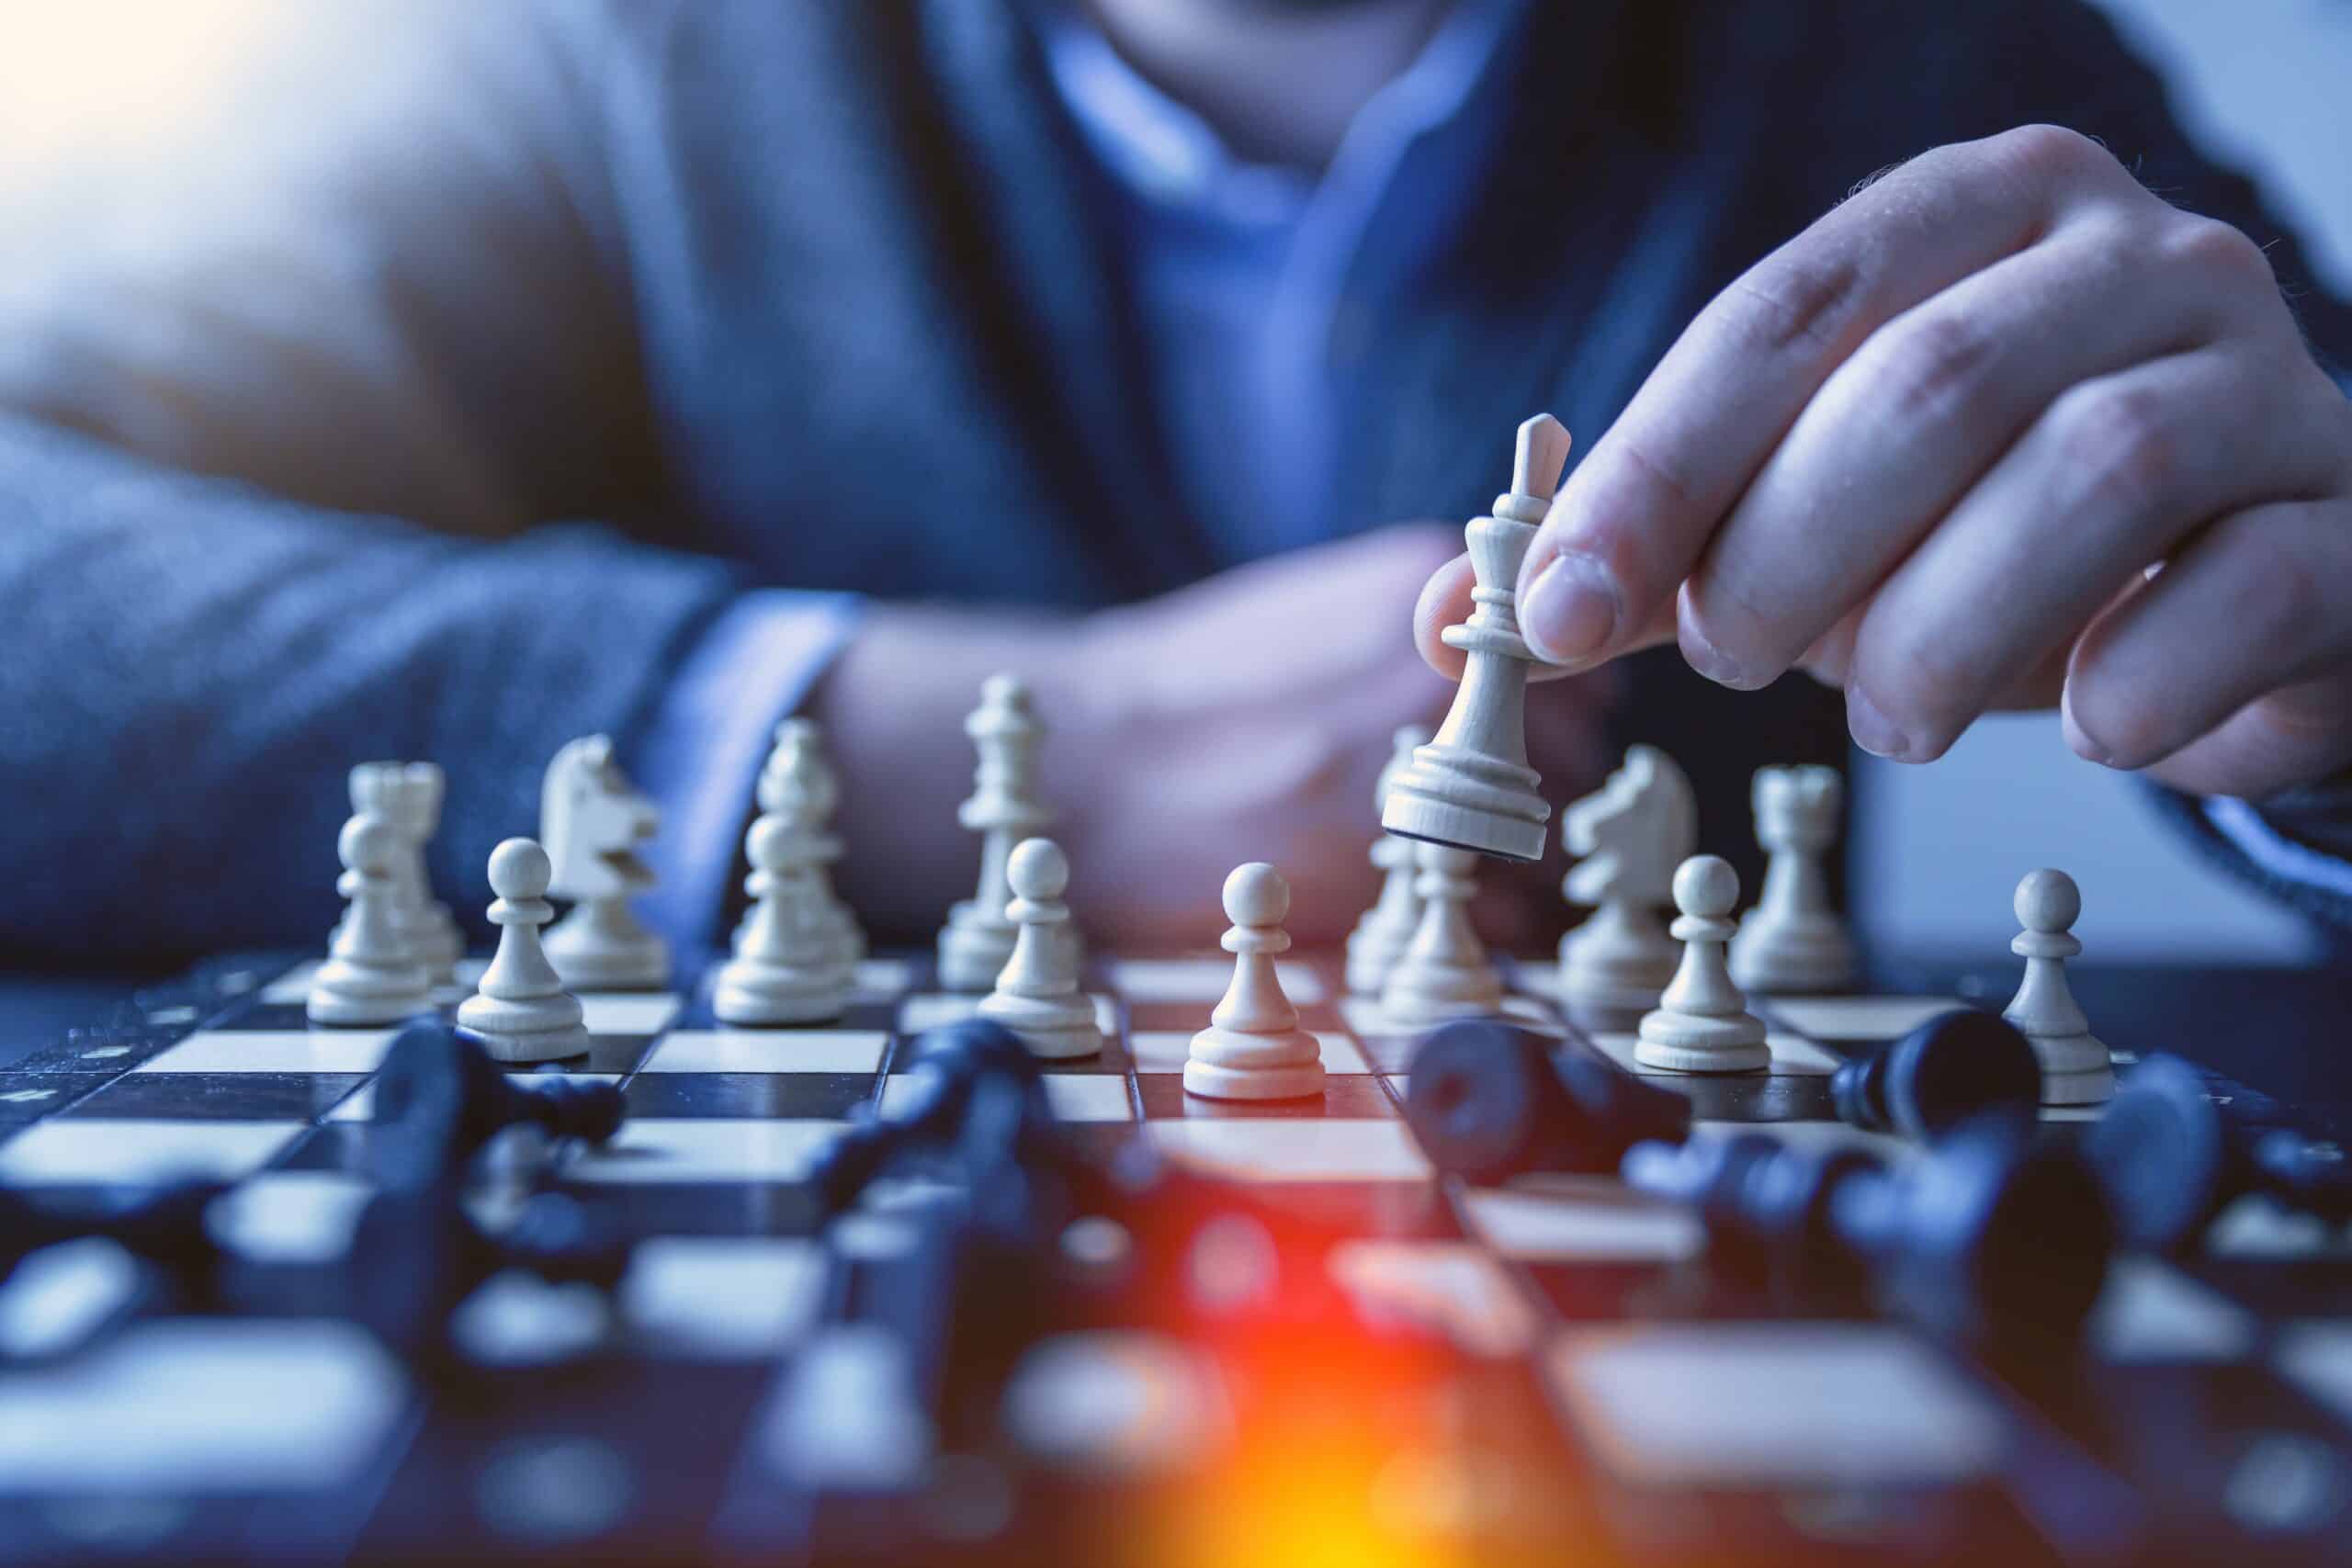 A game of chess is like an HR strategy: every move counts